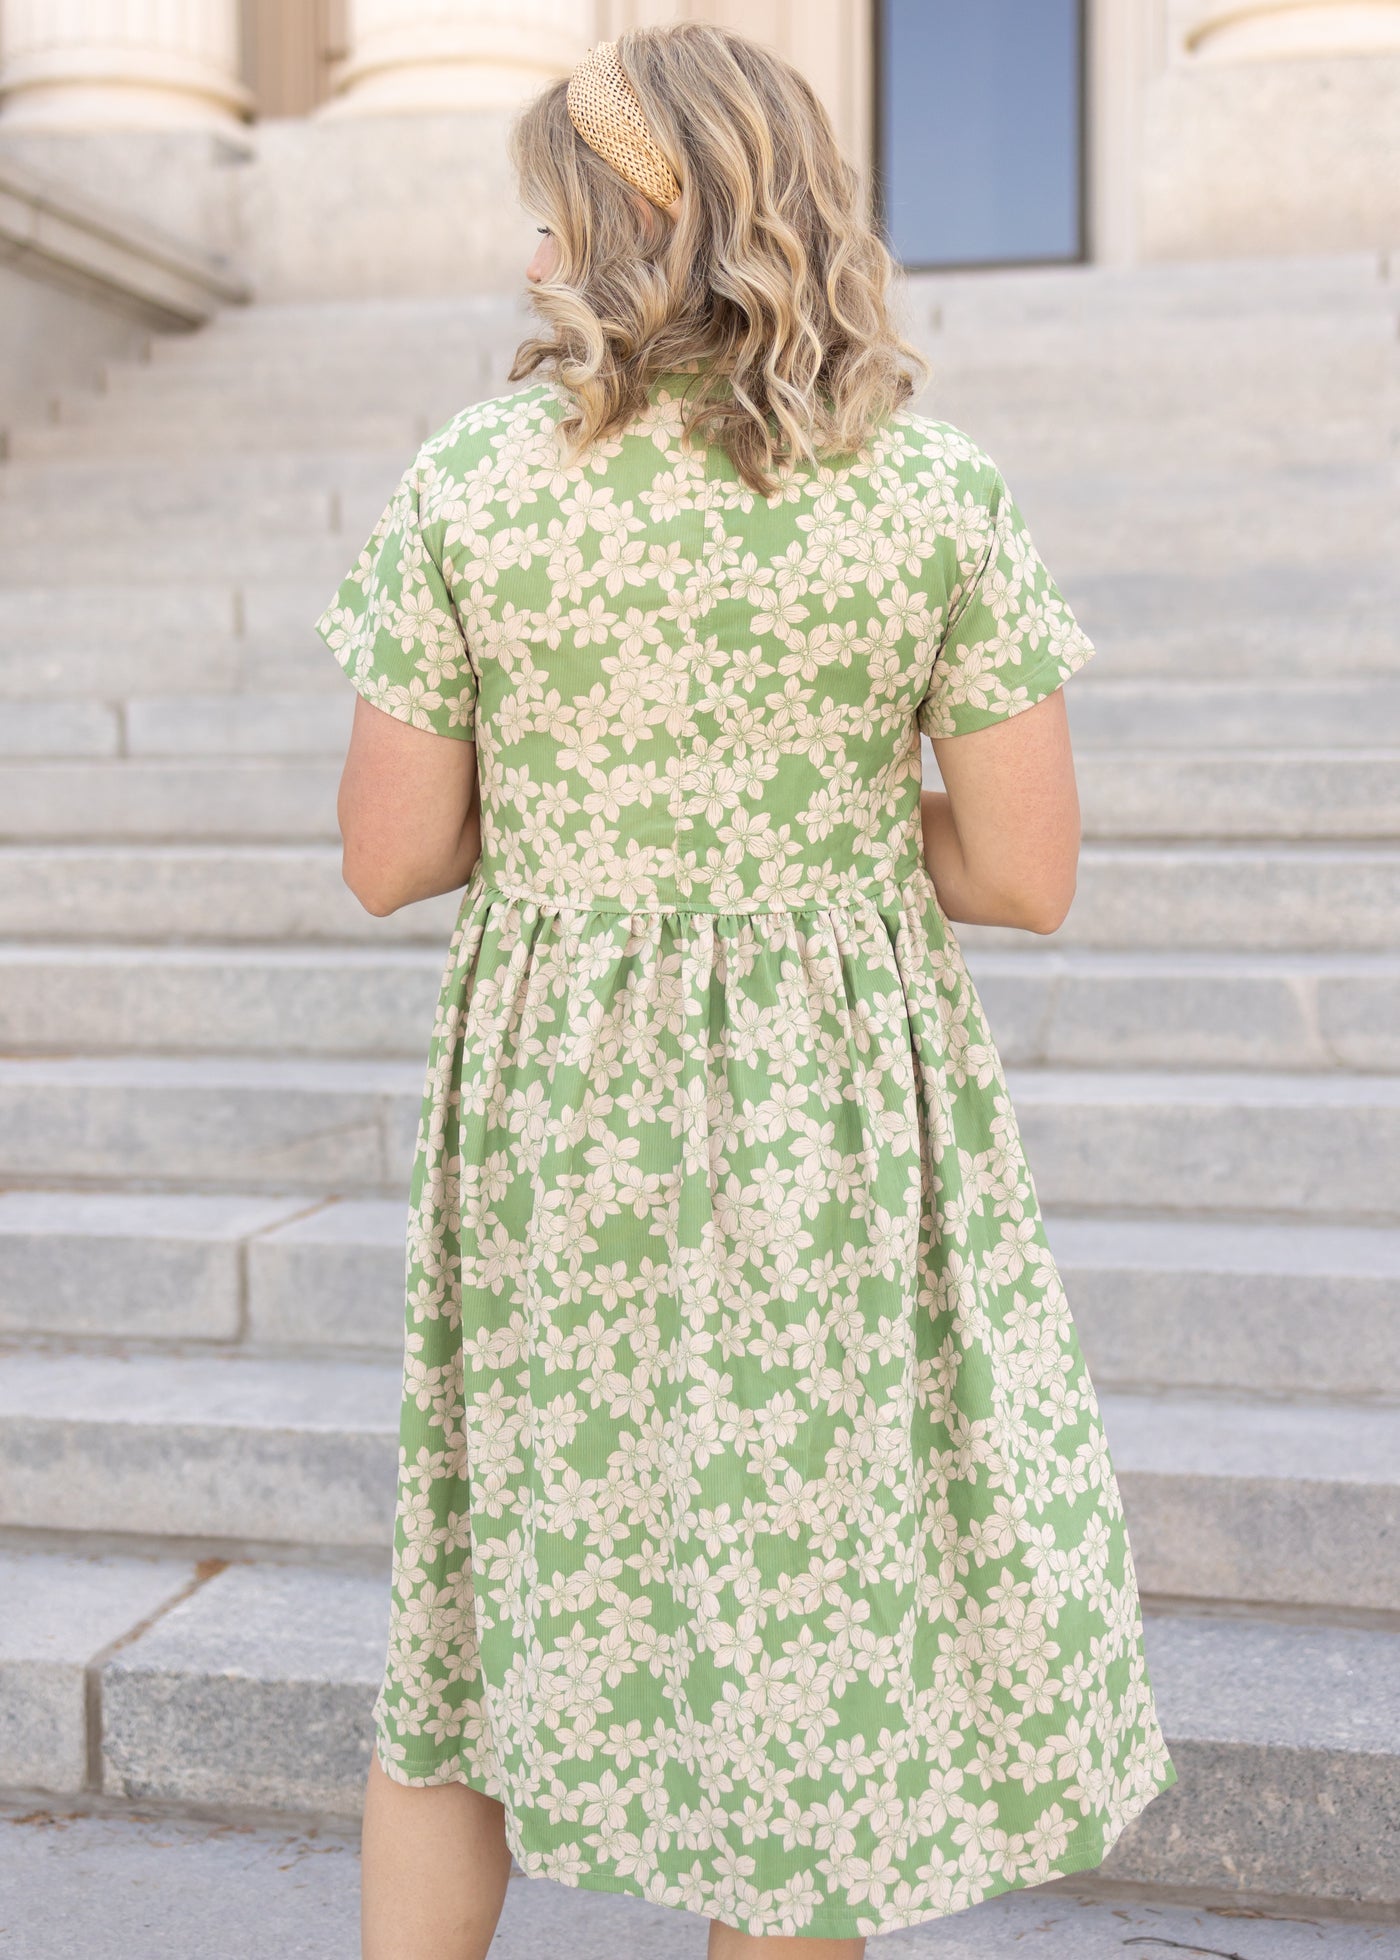 Back view of a short sleeve green floral dress